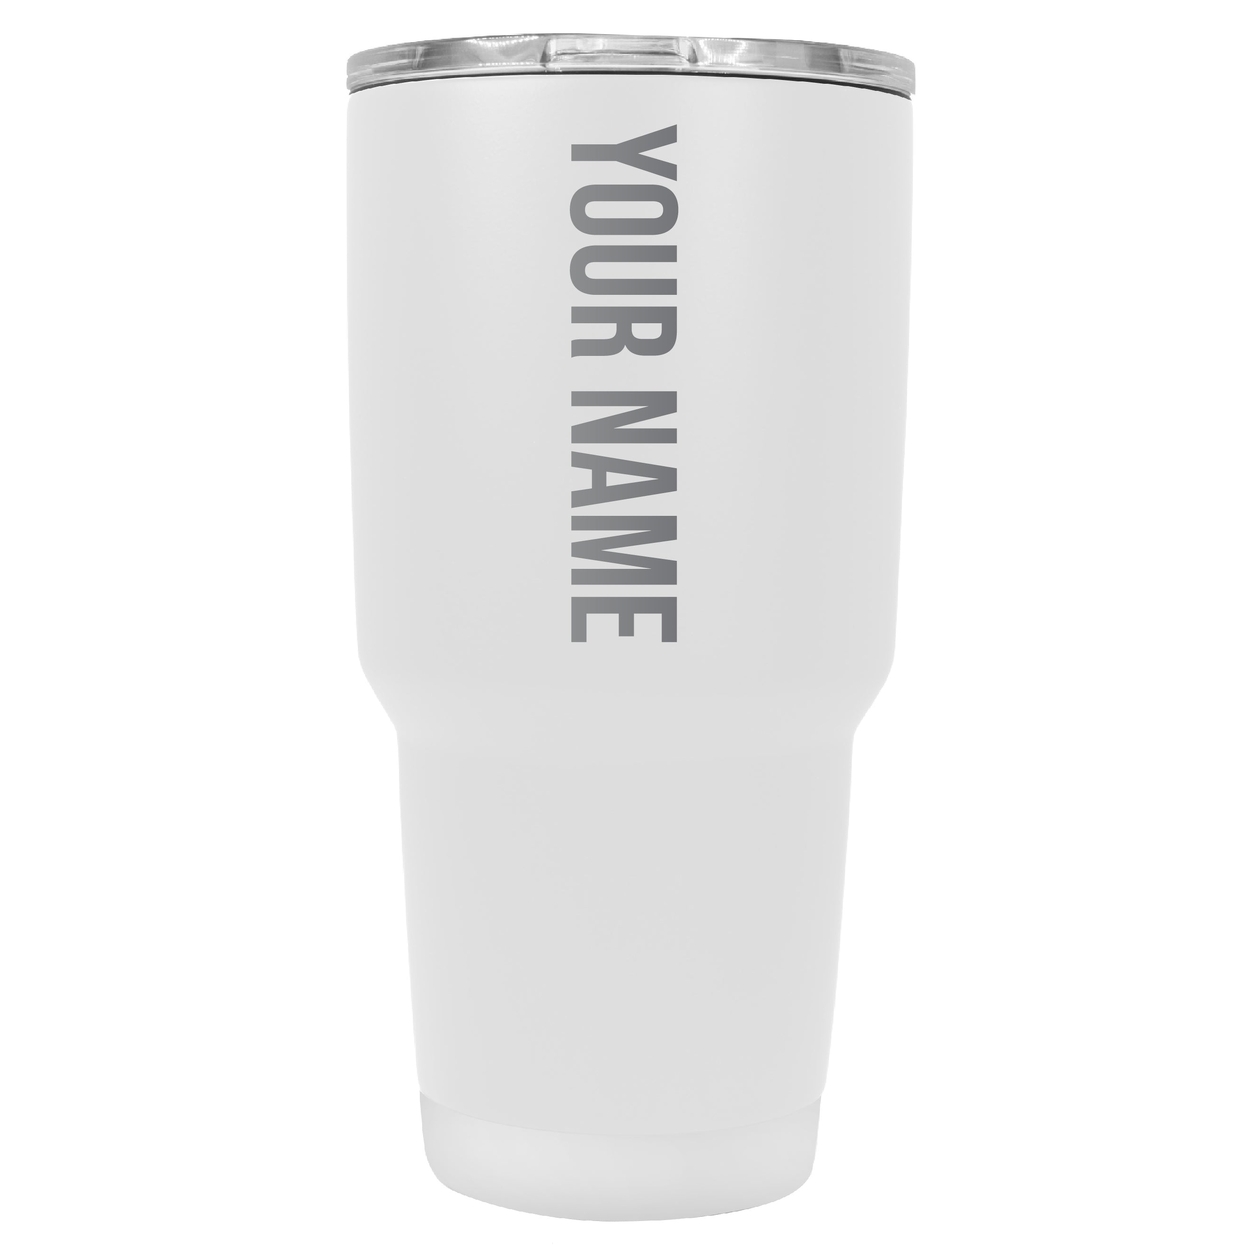 Customizable Laser Etched 24 Oz Insulated Stainless Steel Tumbler Personalized With Custom Name Or Message - White, Single